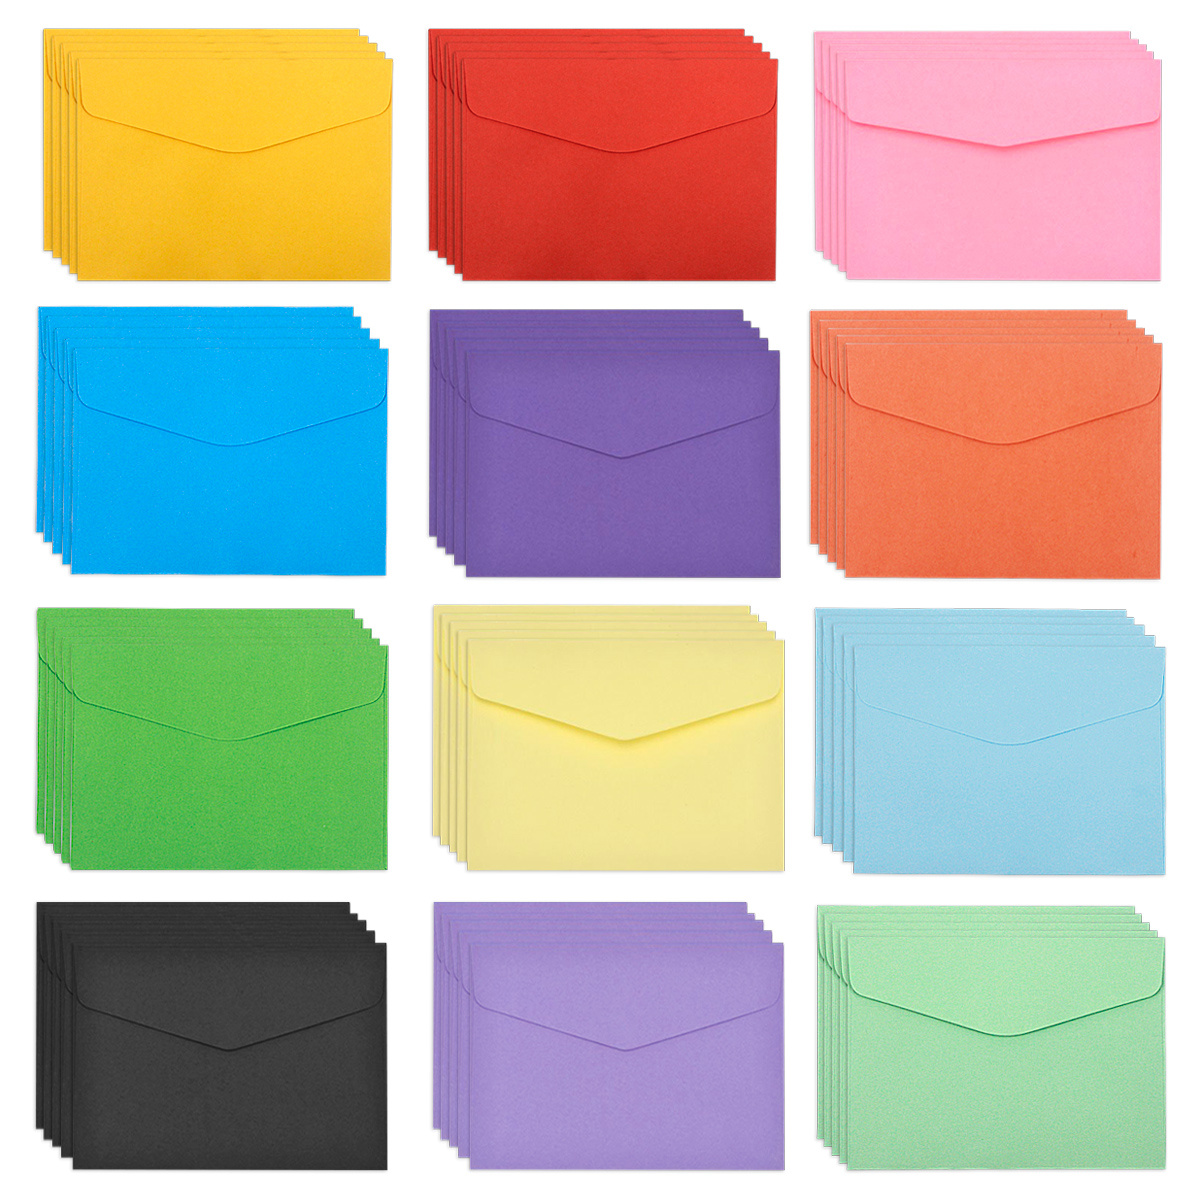 Wishop A7 Colorful Envelopes and Blank Cards 24 Pieces A7 Envelopes and 24 Pieces 5x7 Colorful Flat Cards for Weddings, Invitations, Birthday, Baby